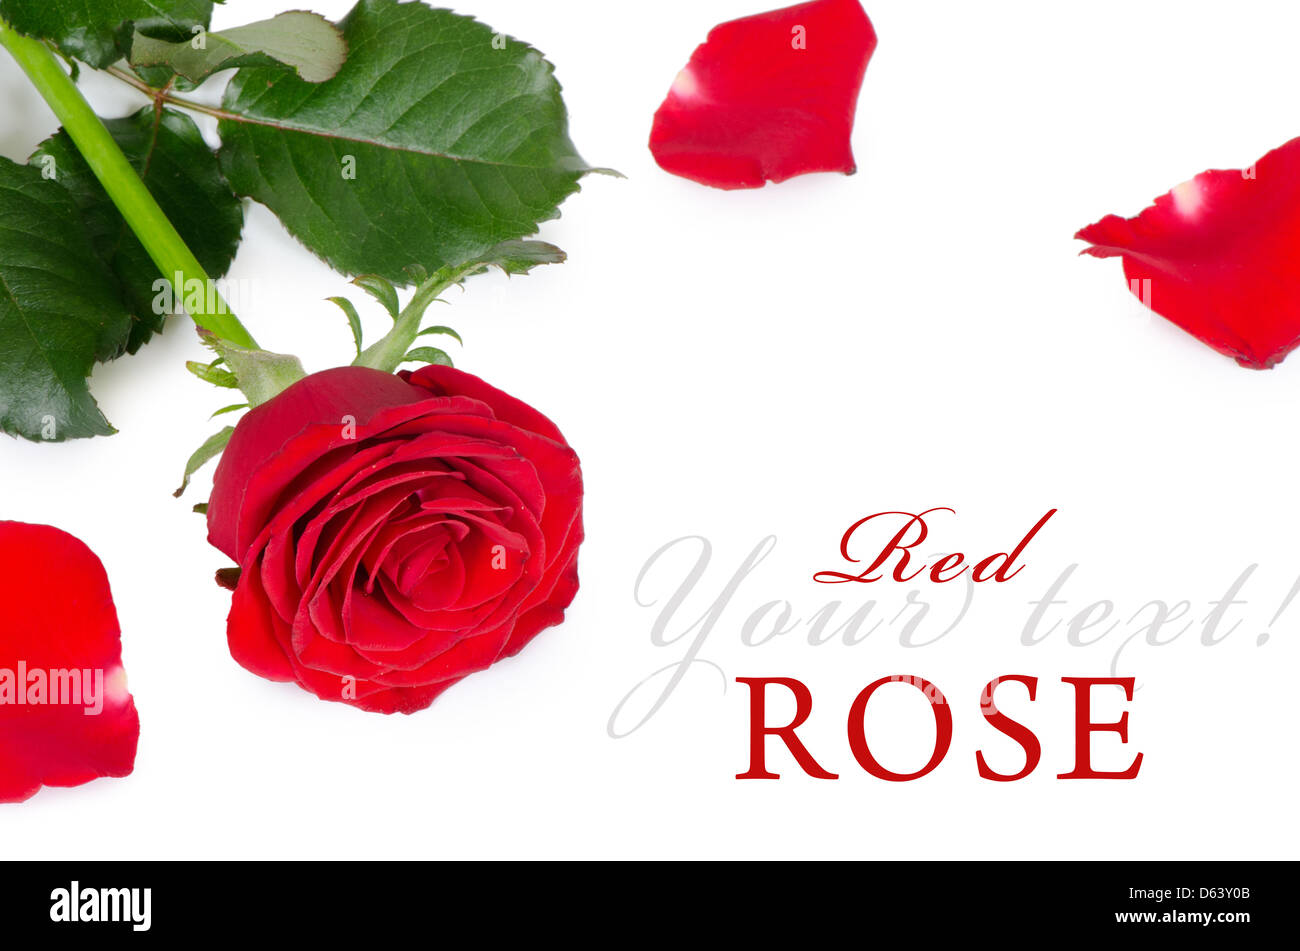 The red roses isolated on white background Stock Photo